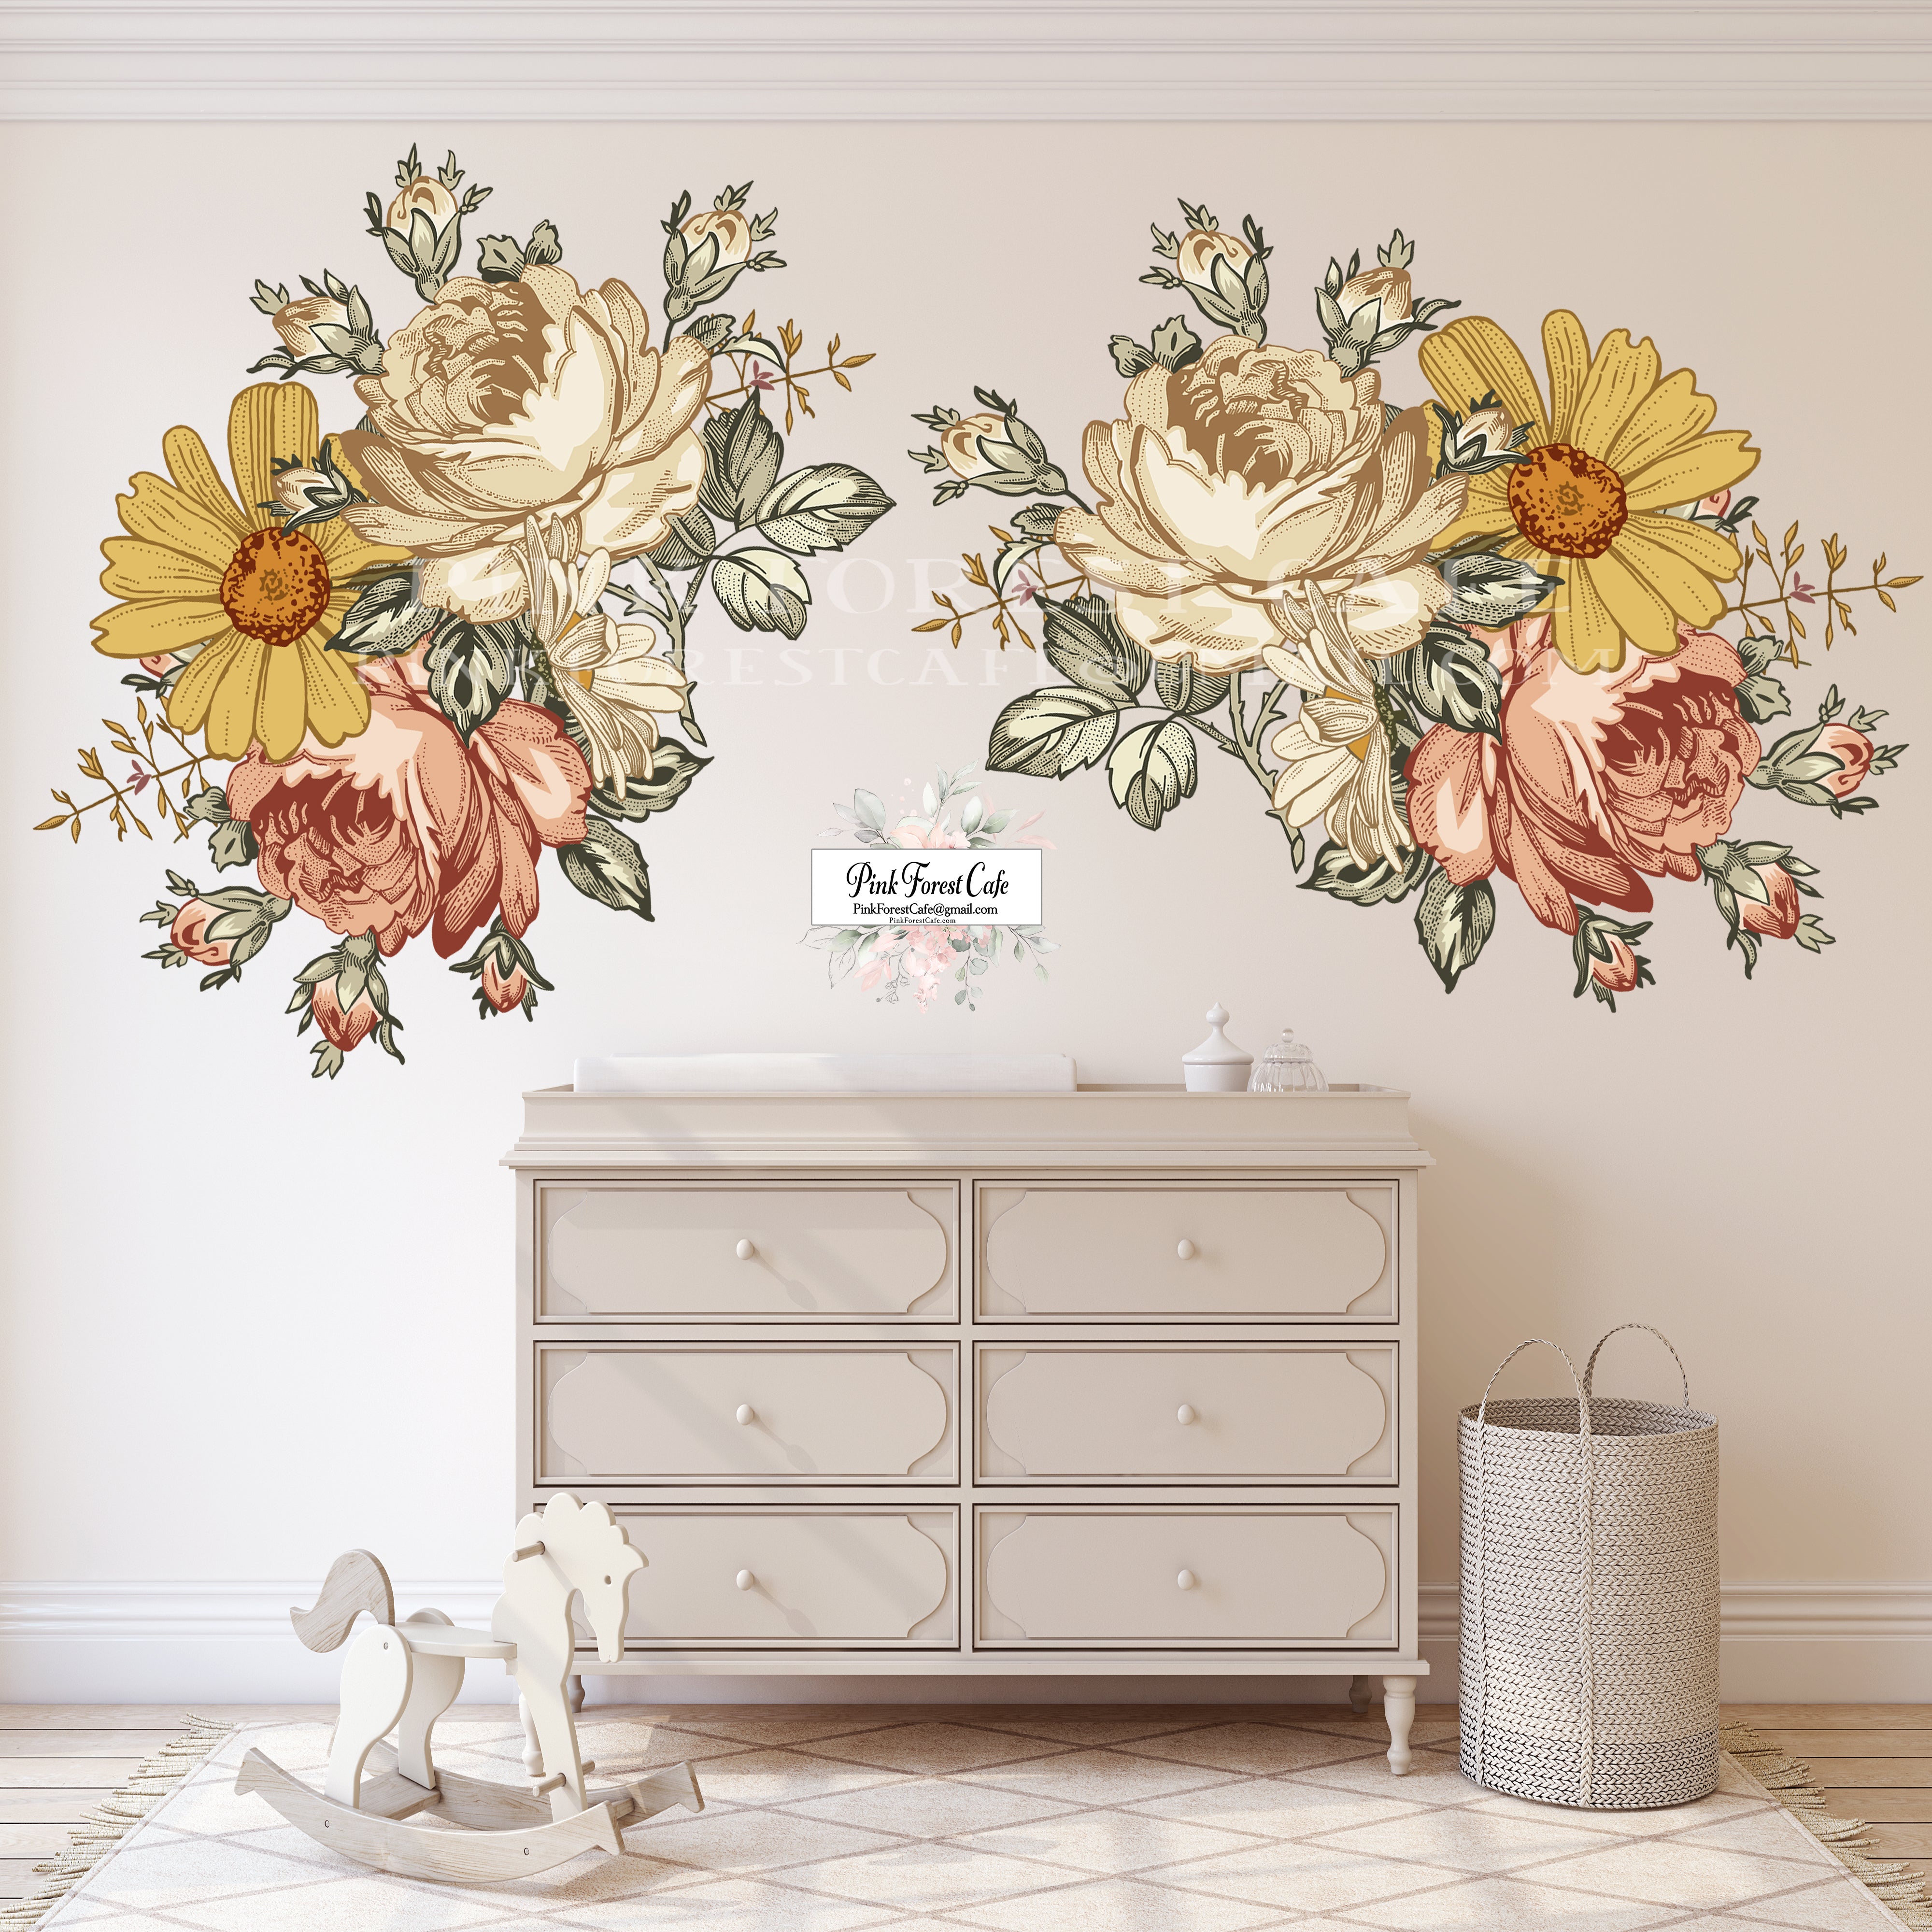 2 - 40" Vintage Rose Peony Wall Decal Sticker Floral Flower Decals Boho Decor